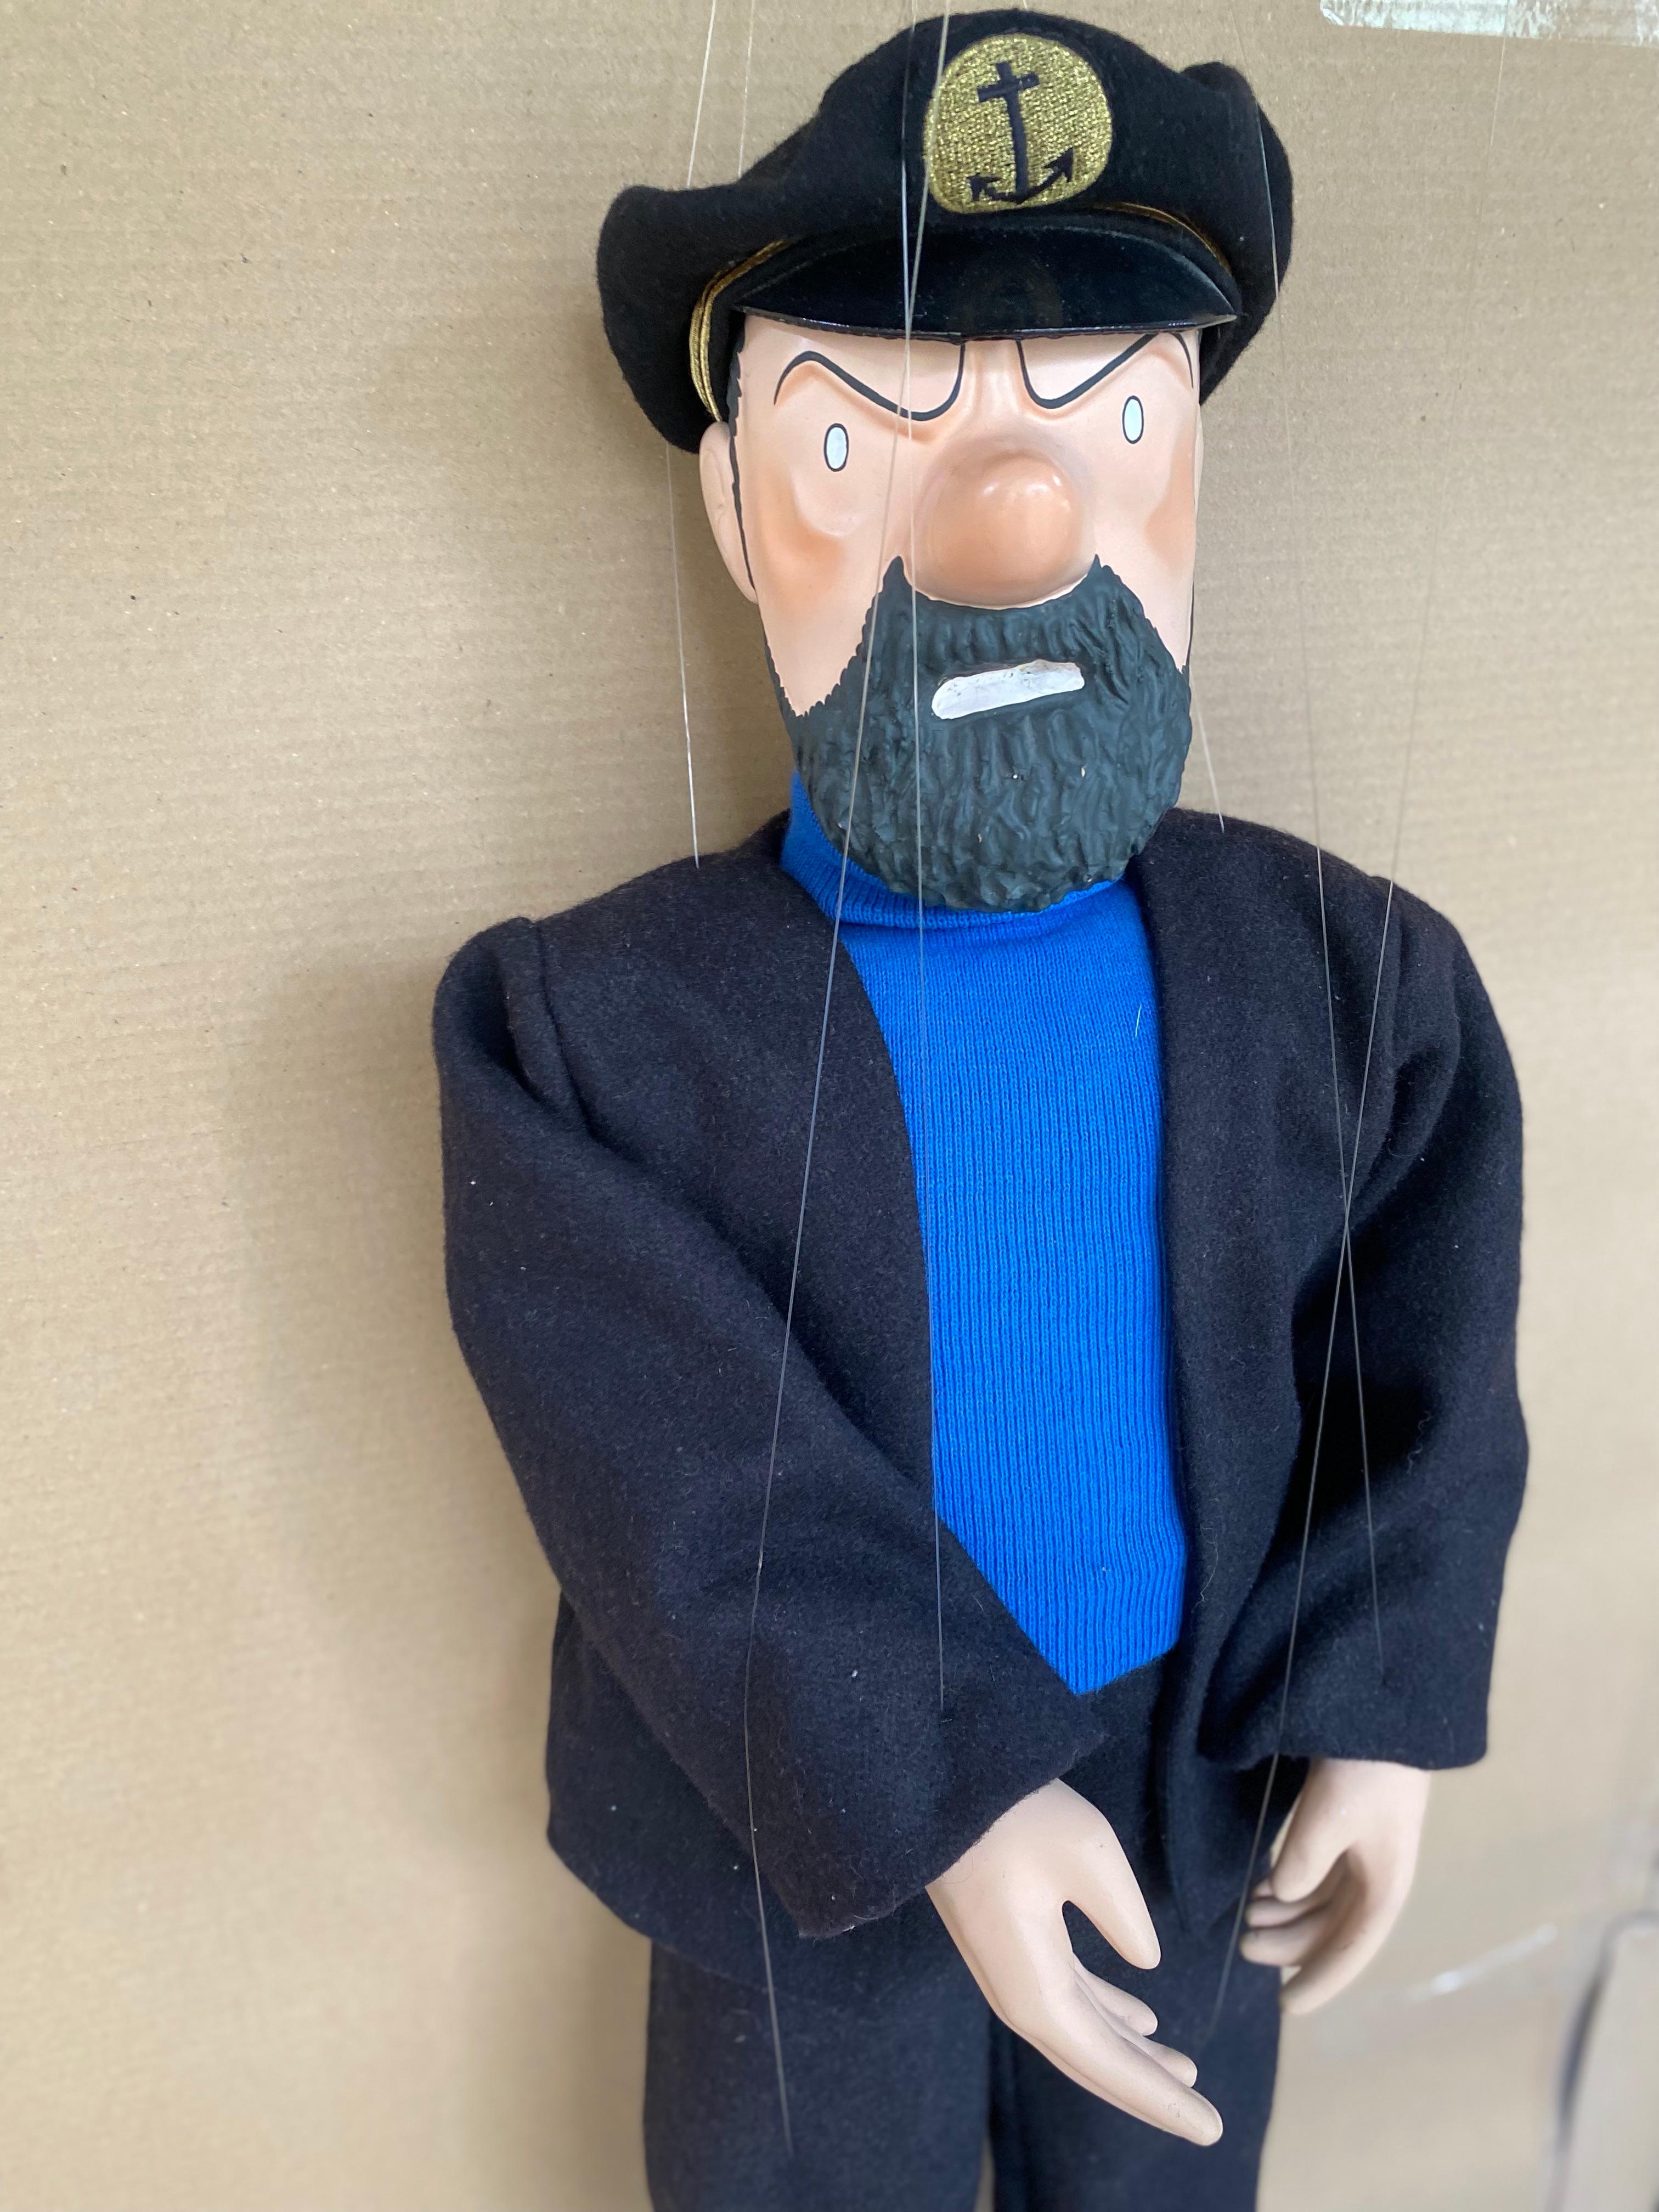 Very rare Captain Haddock puppet
HERGÉ, Georges Remi dit (1907-1983)
Leblon Delienne
1986
Dimensions: h80 x w36 x d5 cm 
Wool / leather / resin
Very good condition, 300 copies, 
signed on the neck. 
145/300
Price: 1400 €.